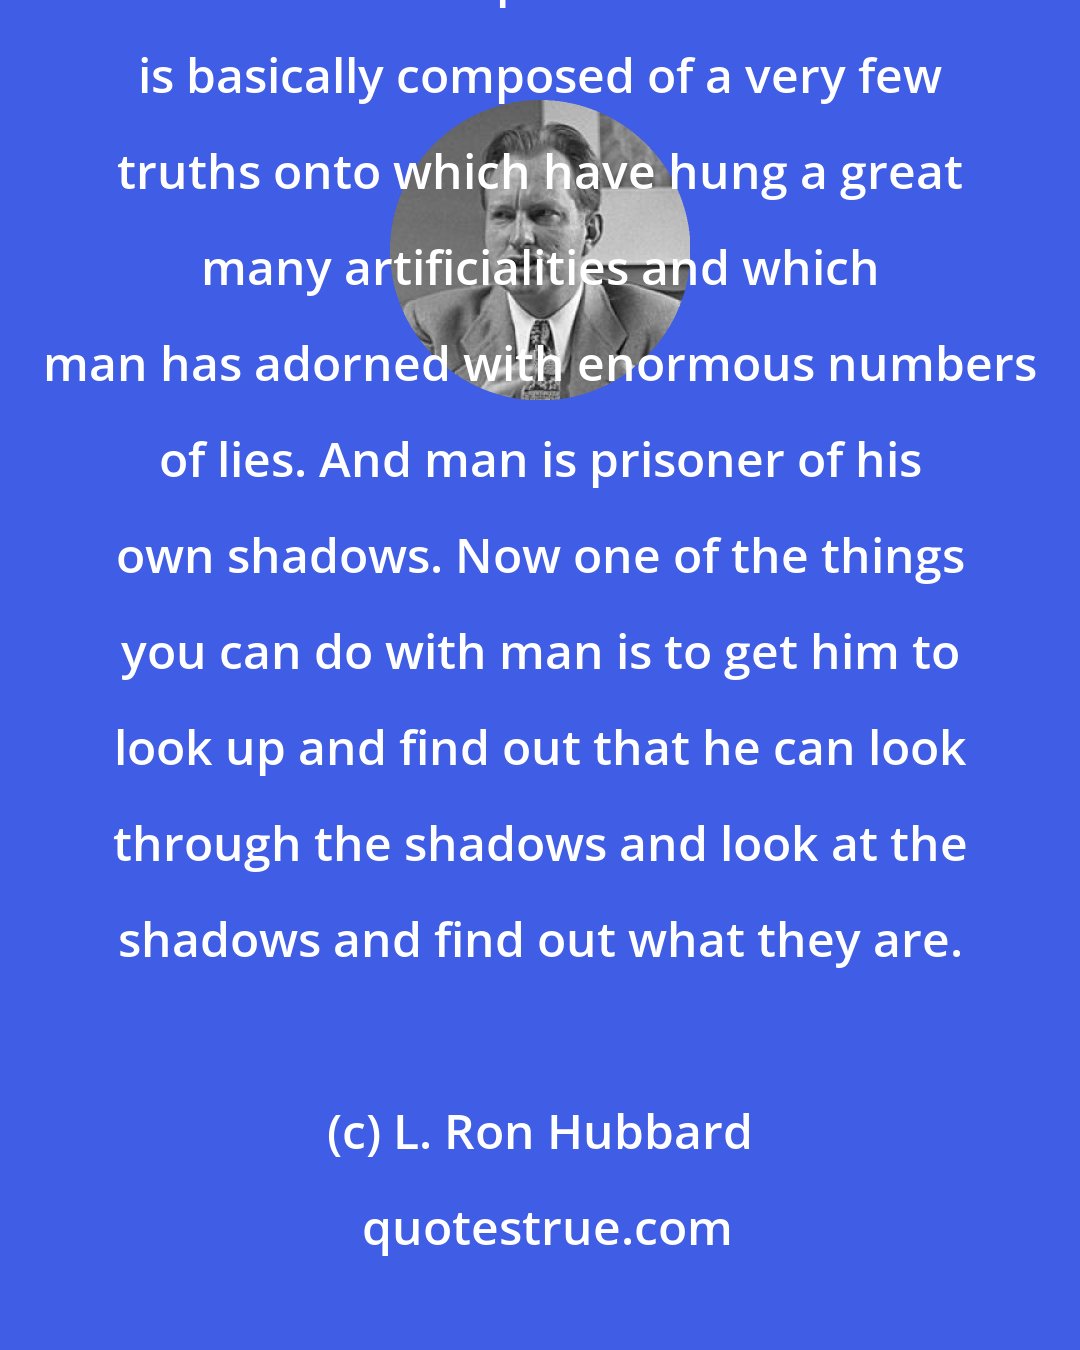 L. Ron Hubbard: How does life become totally painful By total retreat. Total noninspection becomes total pain.But existence is basically composed of a very few truths onto which have hung a great many artificialities and which man has adorned with enormous numbers of lies. And man is prisoner of his own shadows. Now one of the things you can do with man is to get him to look up and find out that he can look through the shadows and look at the shadows and find out what they are.